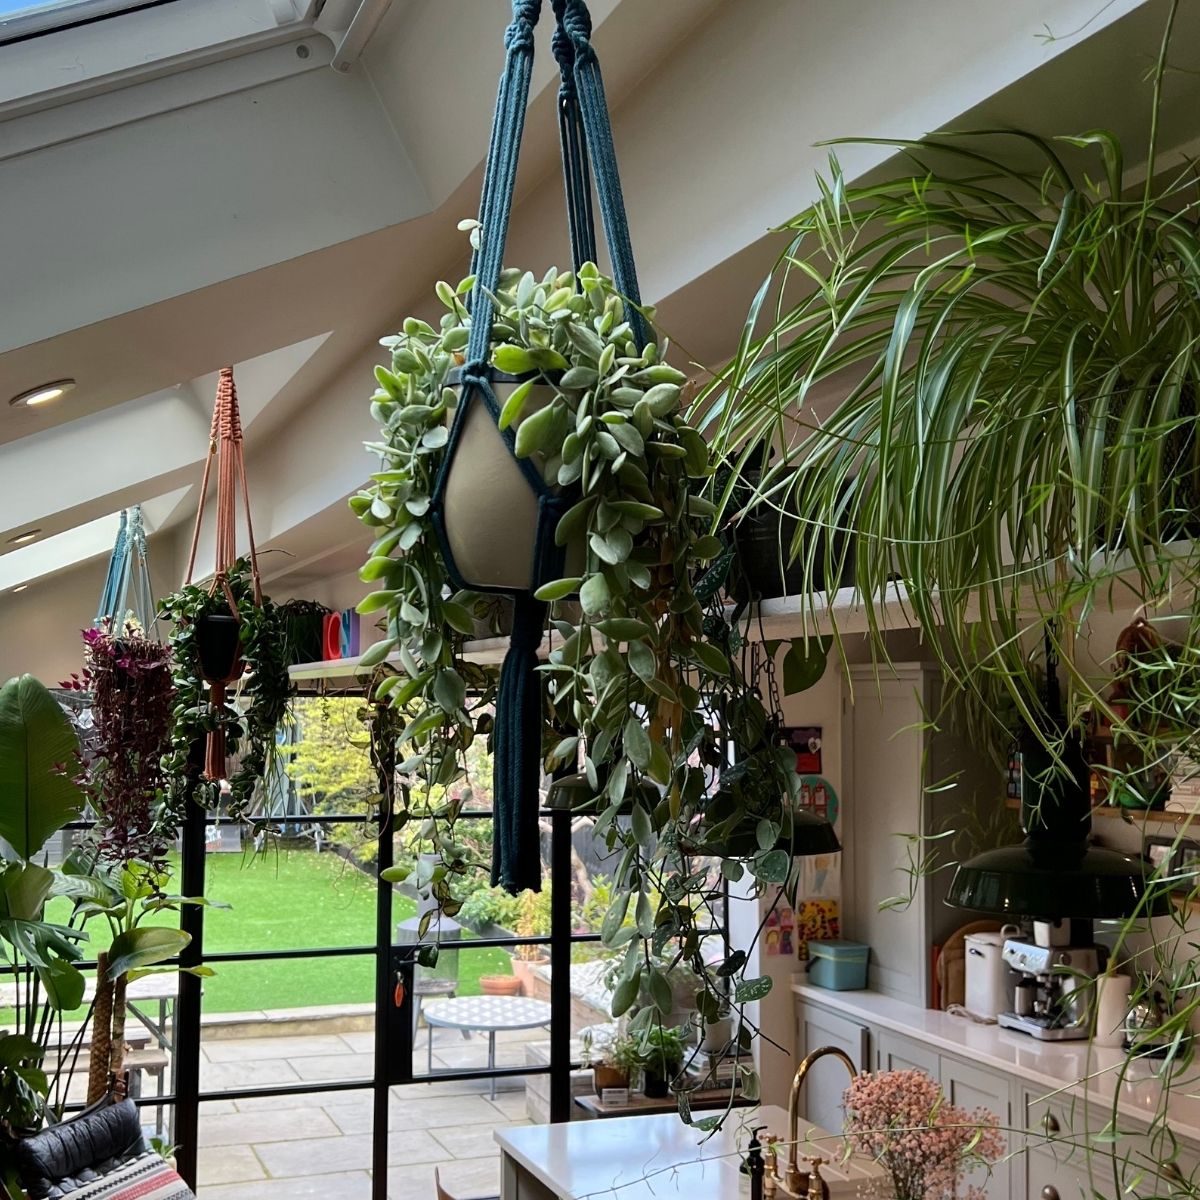 Plant Hangers are a great way to add character, colour and plants to your home. This picture shows three of our macramé plant hangers being hung in a kitchen setting